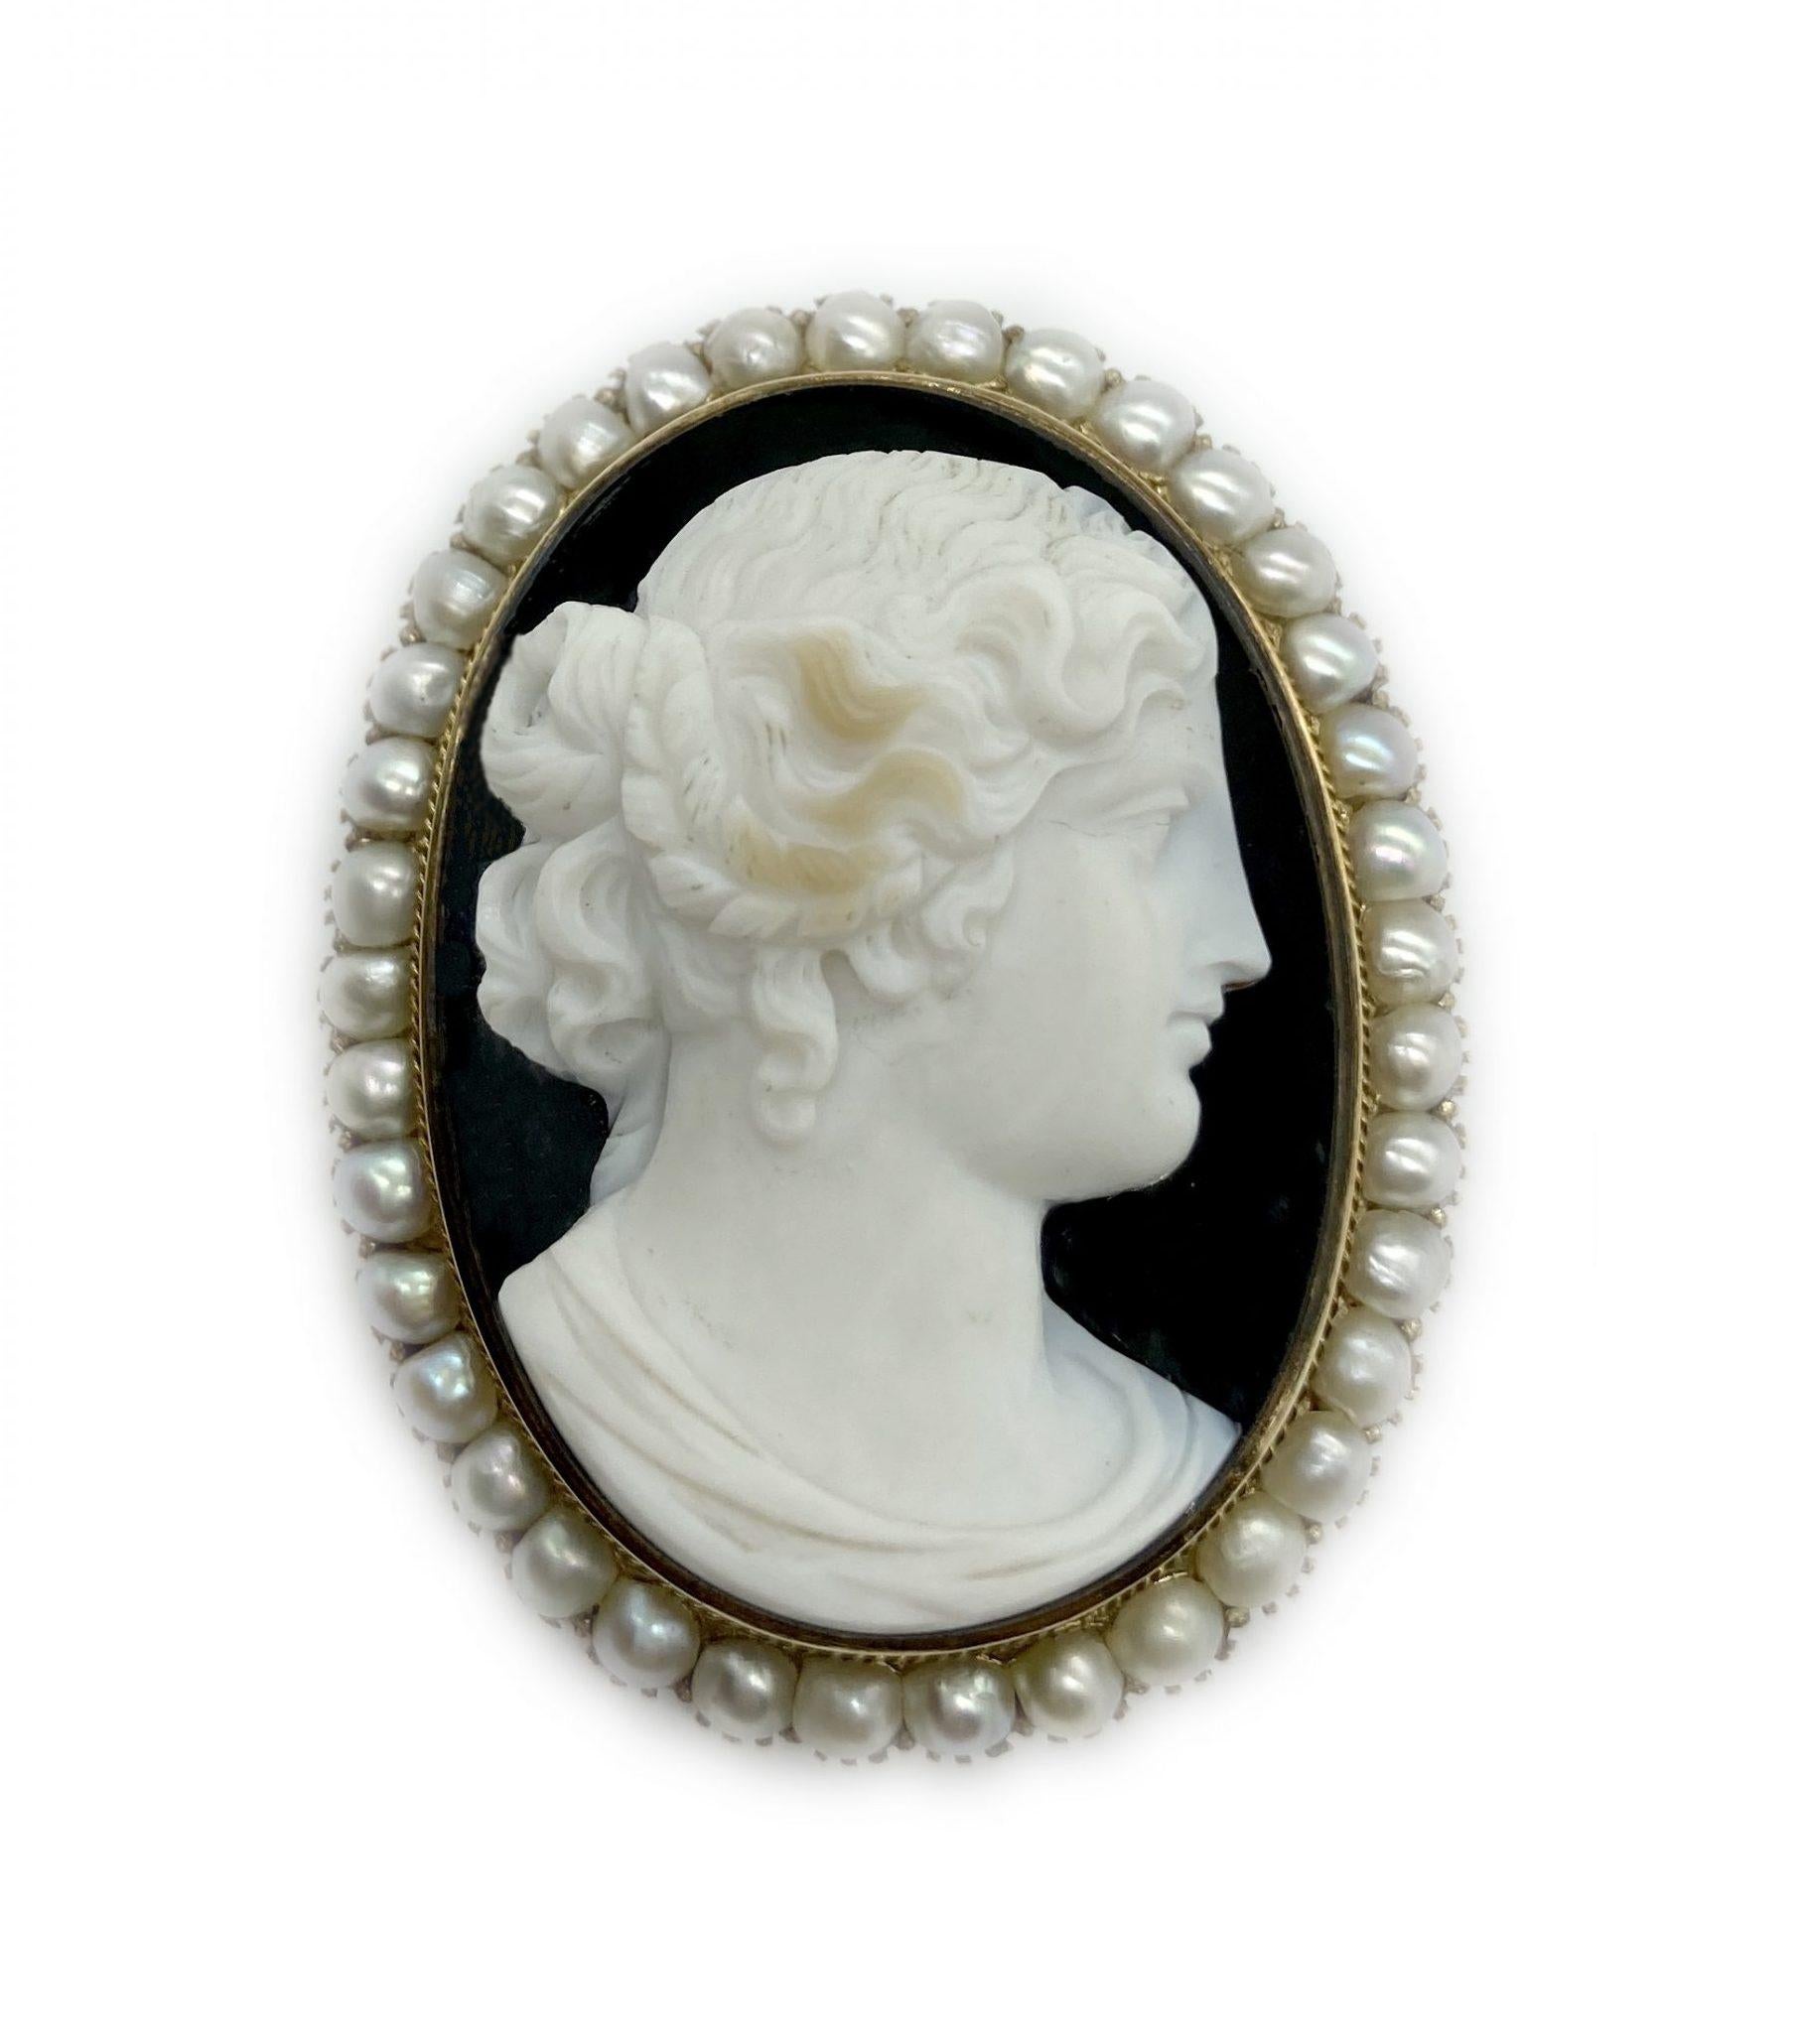 An elegant antique cameo brooch featuring a profile of a lady, encircled with pearls.